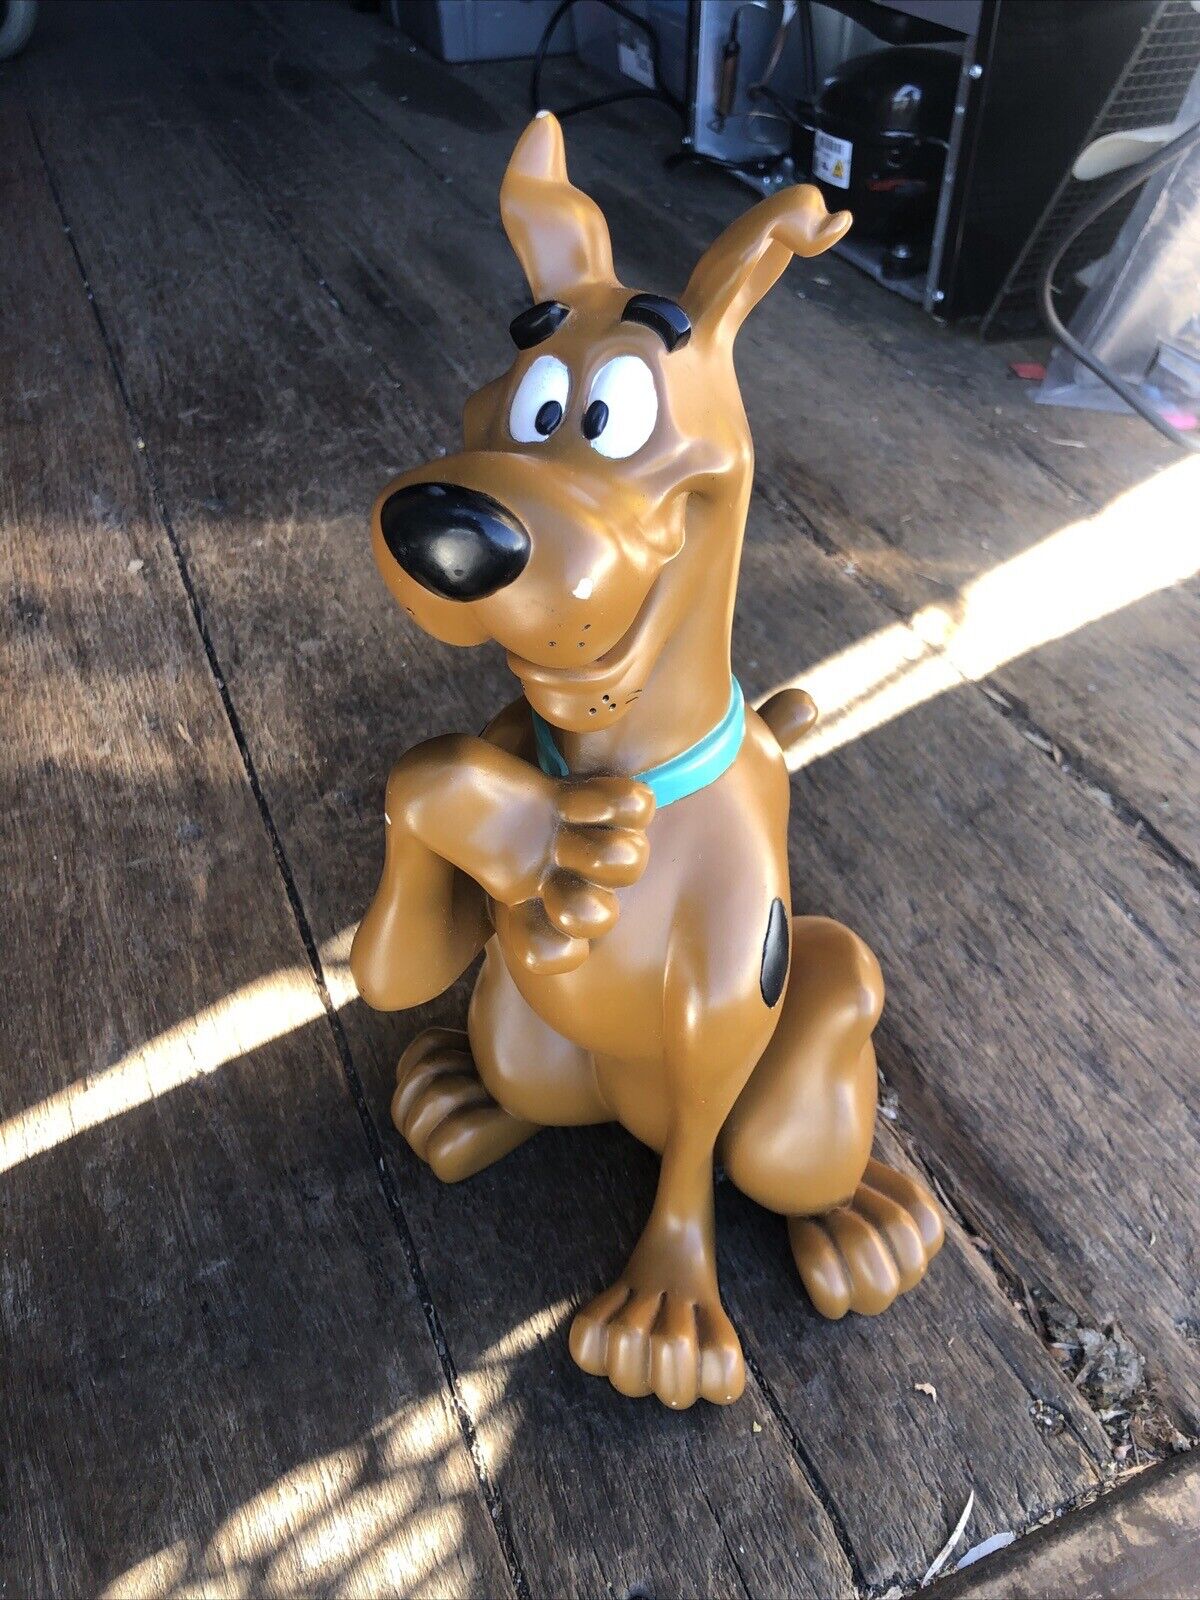 Extremely Rare Hanna Barbera Scooby Doo What? Me? Big Figurine Statue